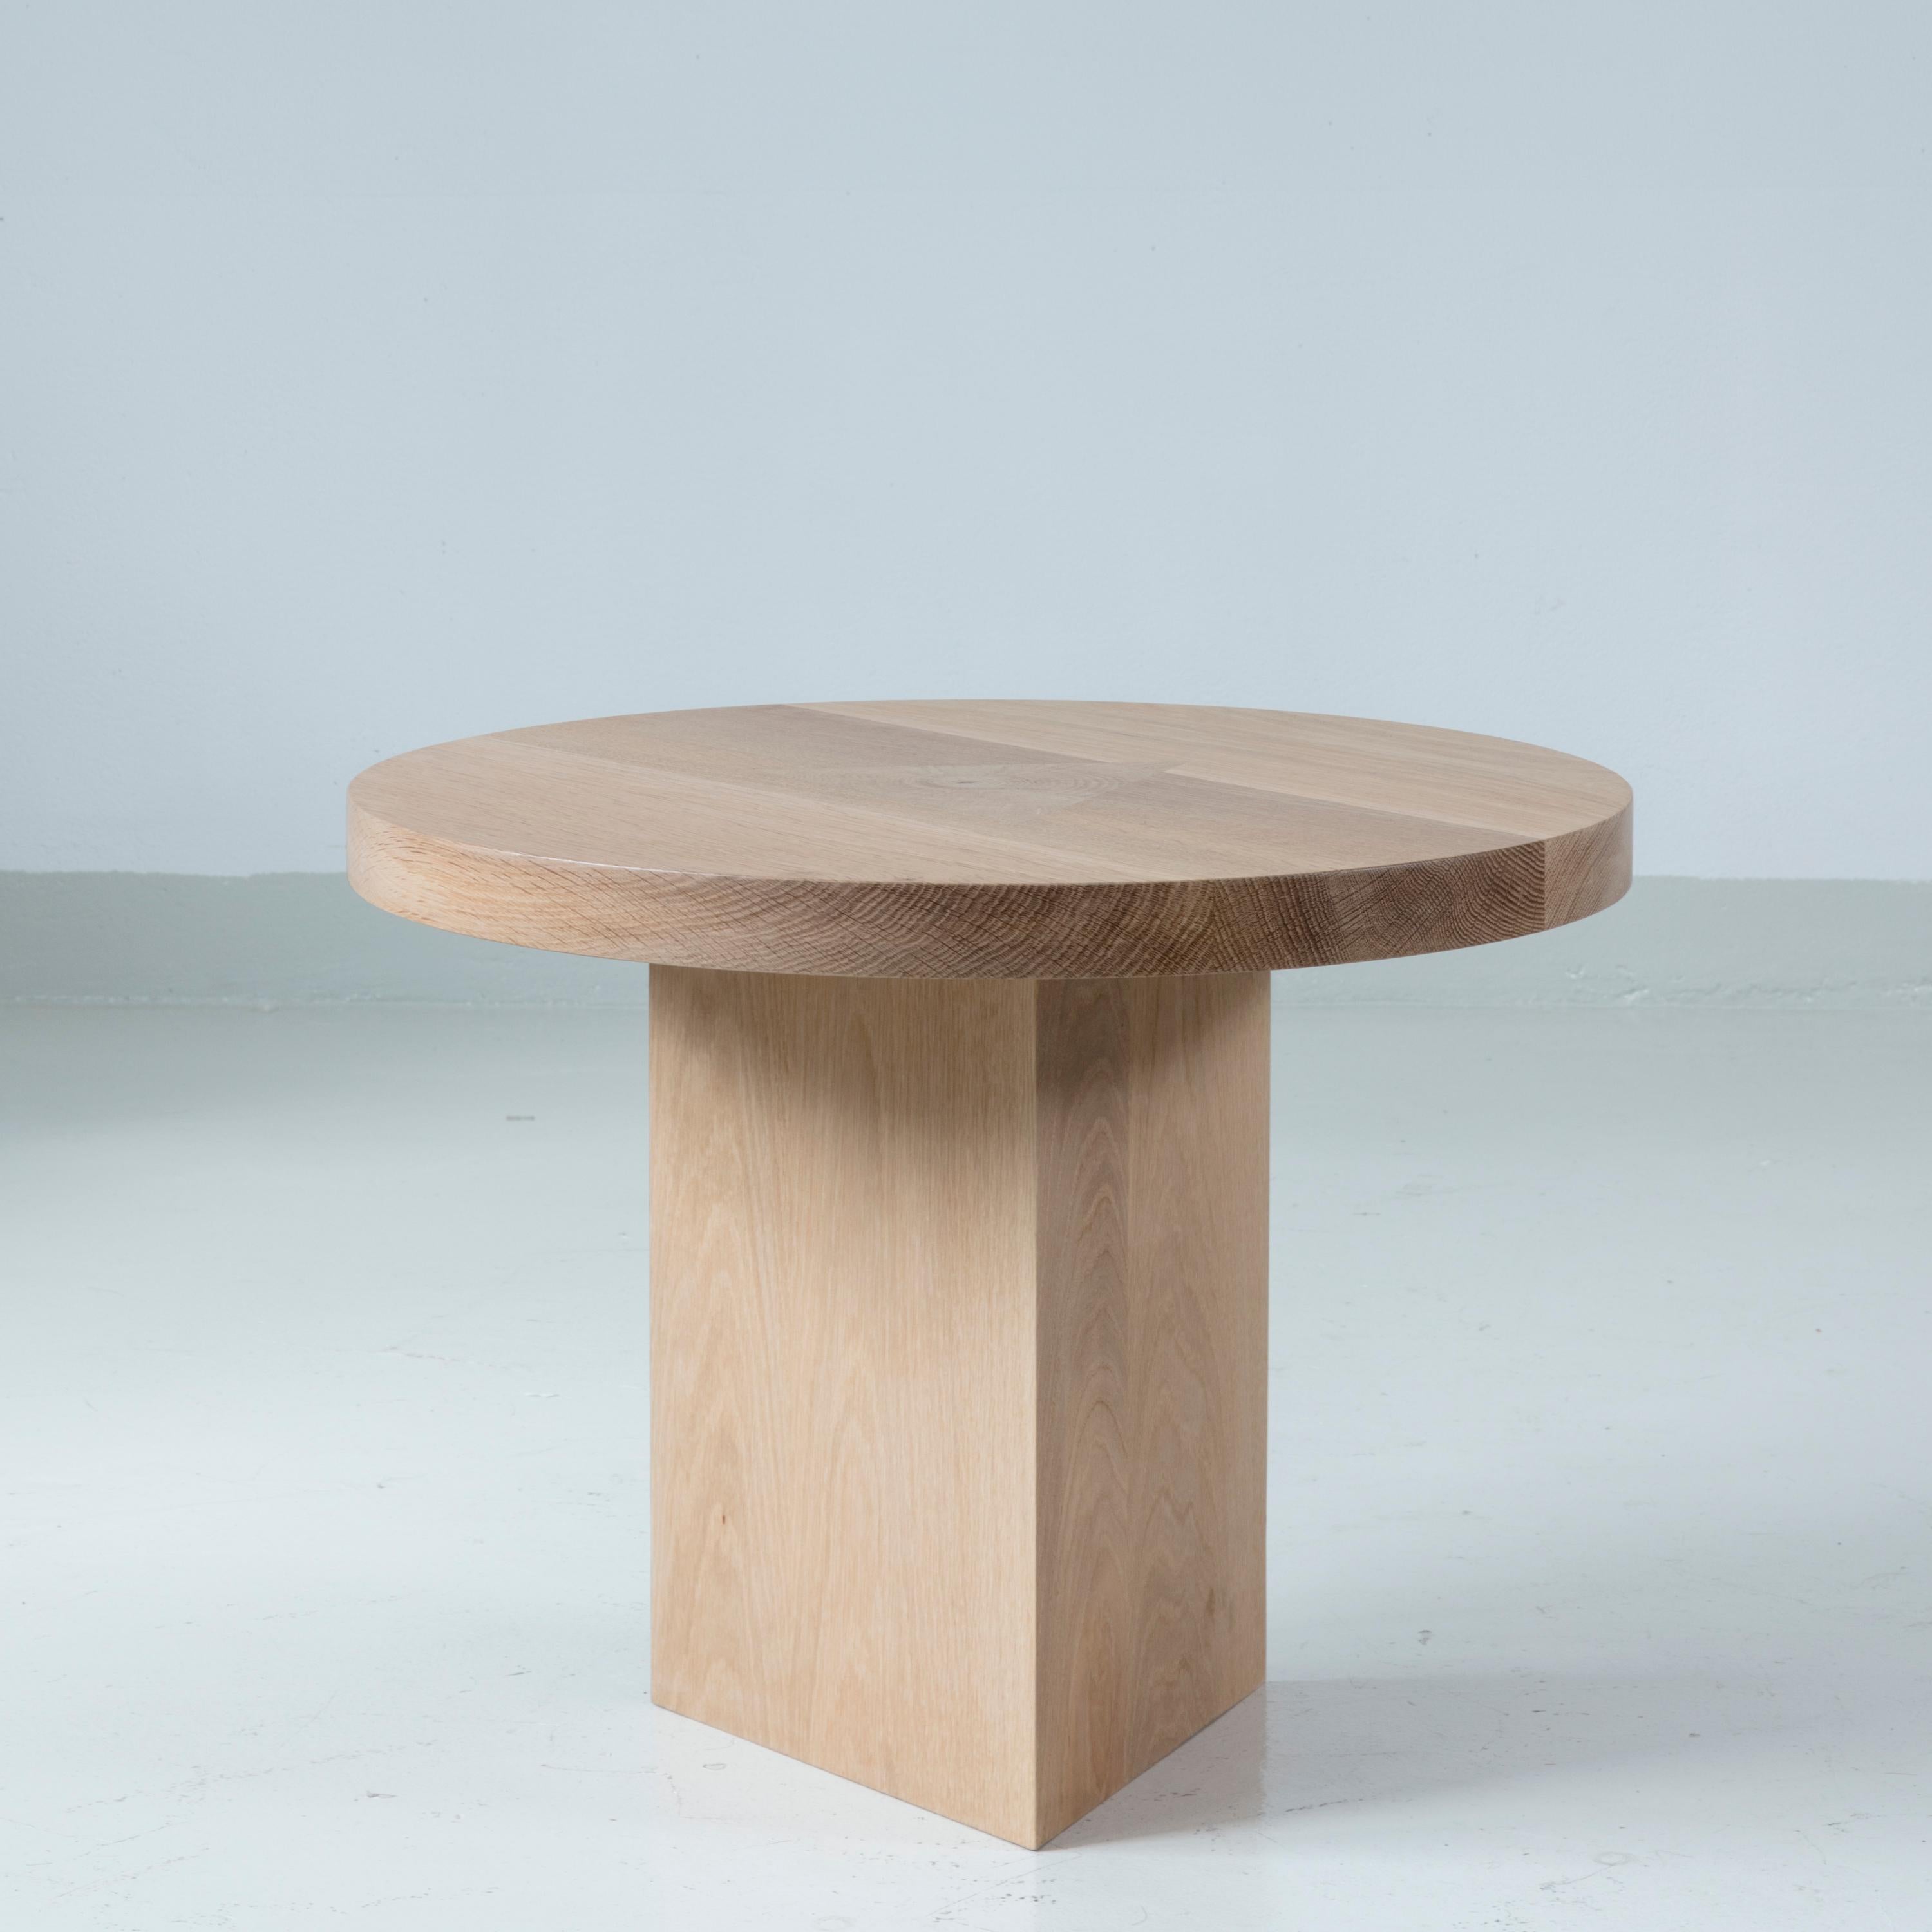 Circular side table in oak with triangular leg that cuts through the round top. Perfect proportions, warm and sober.